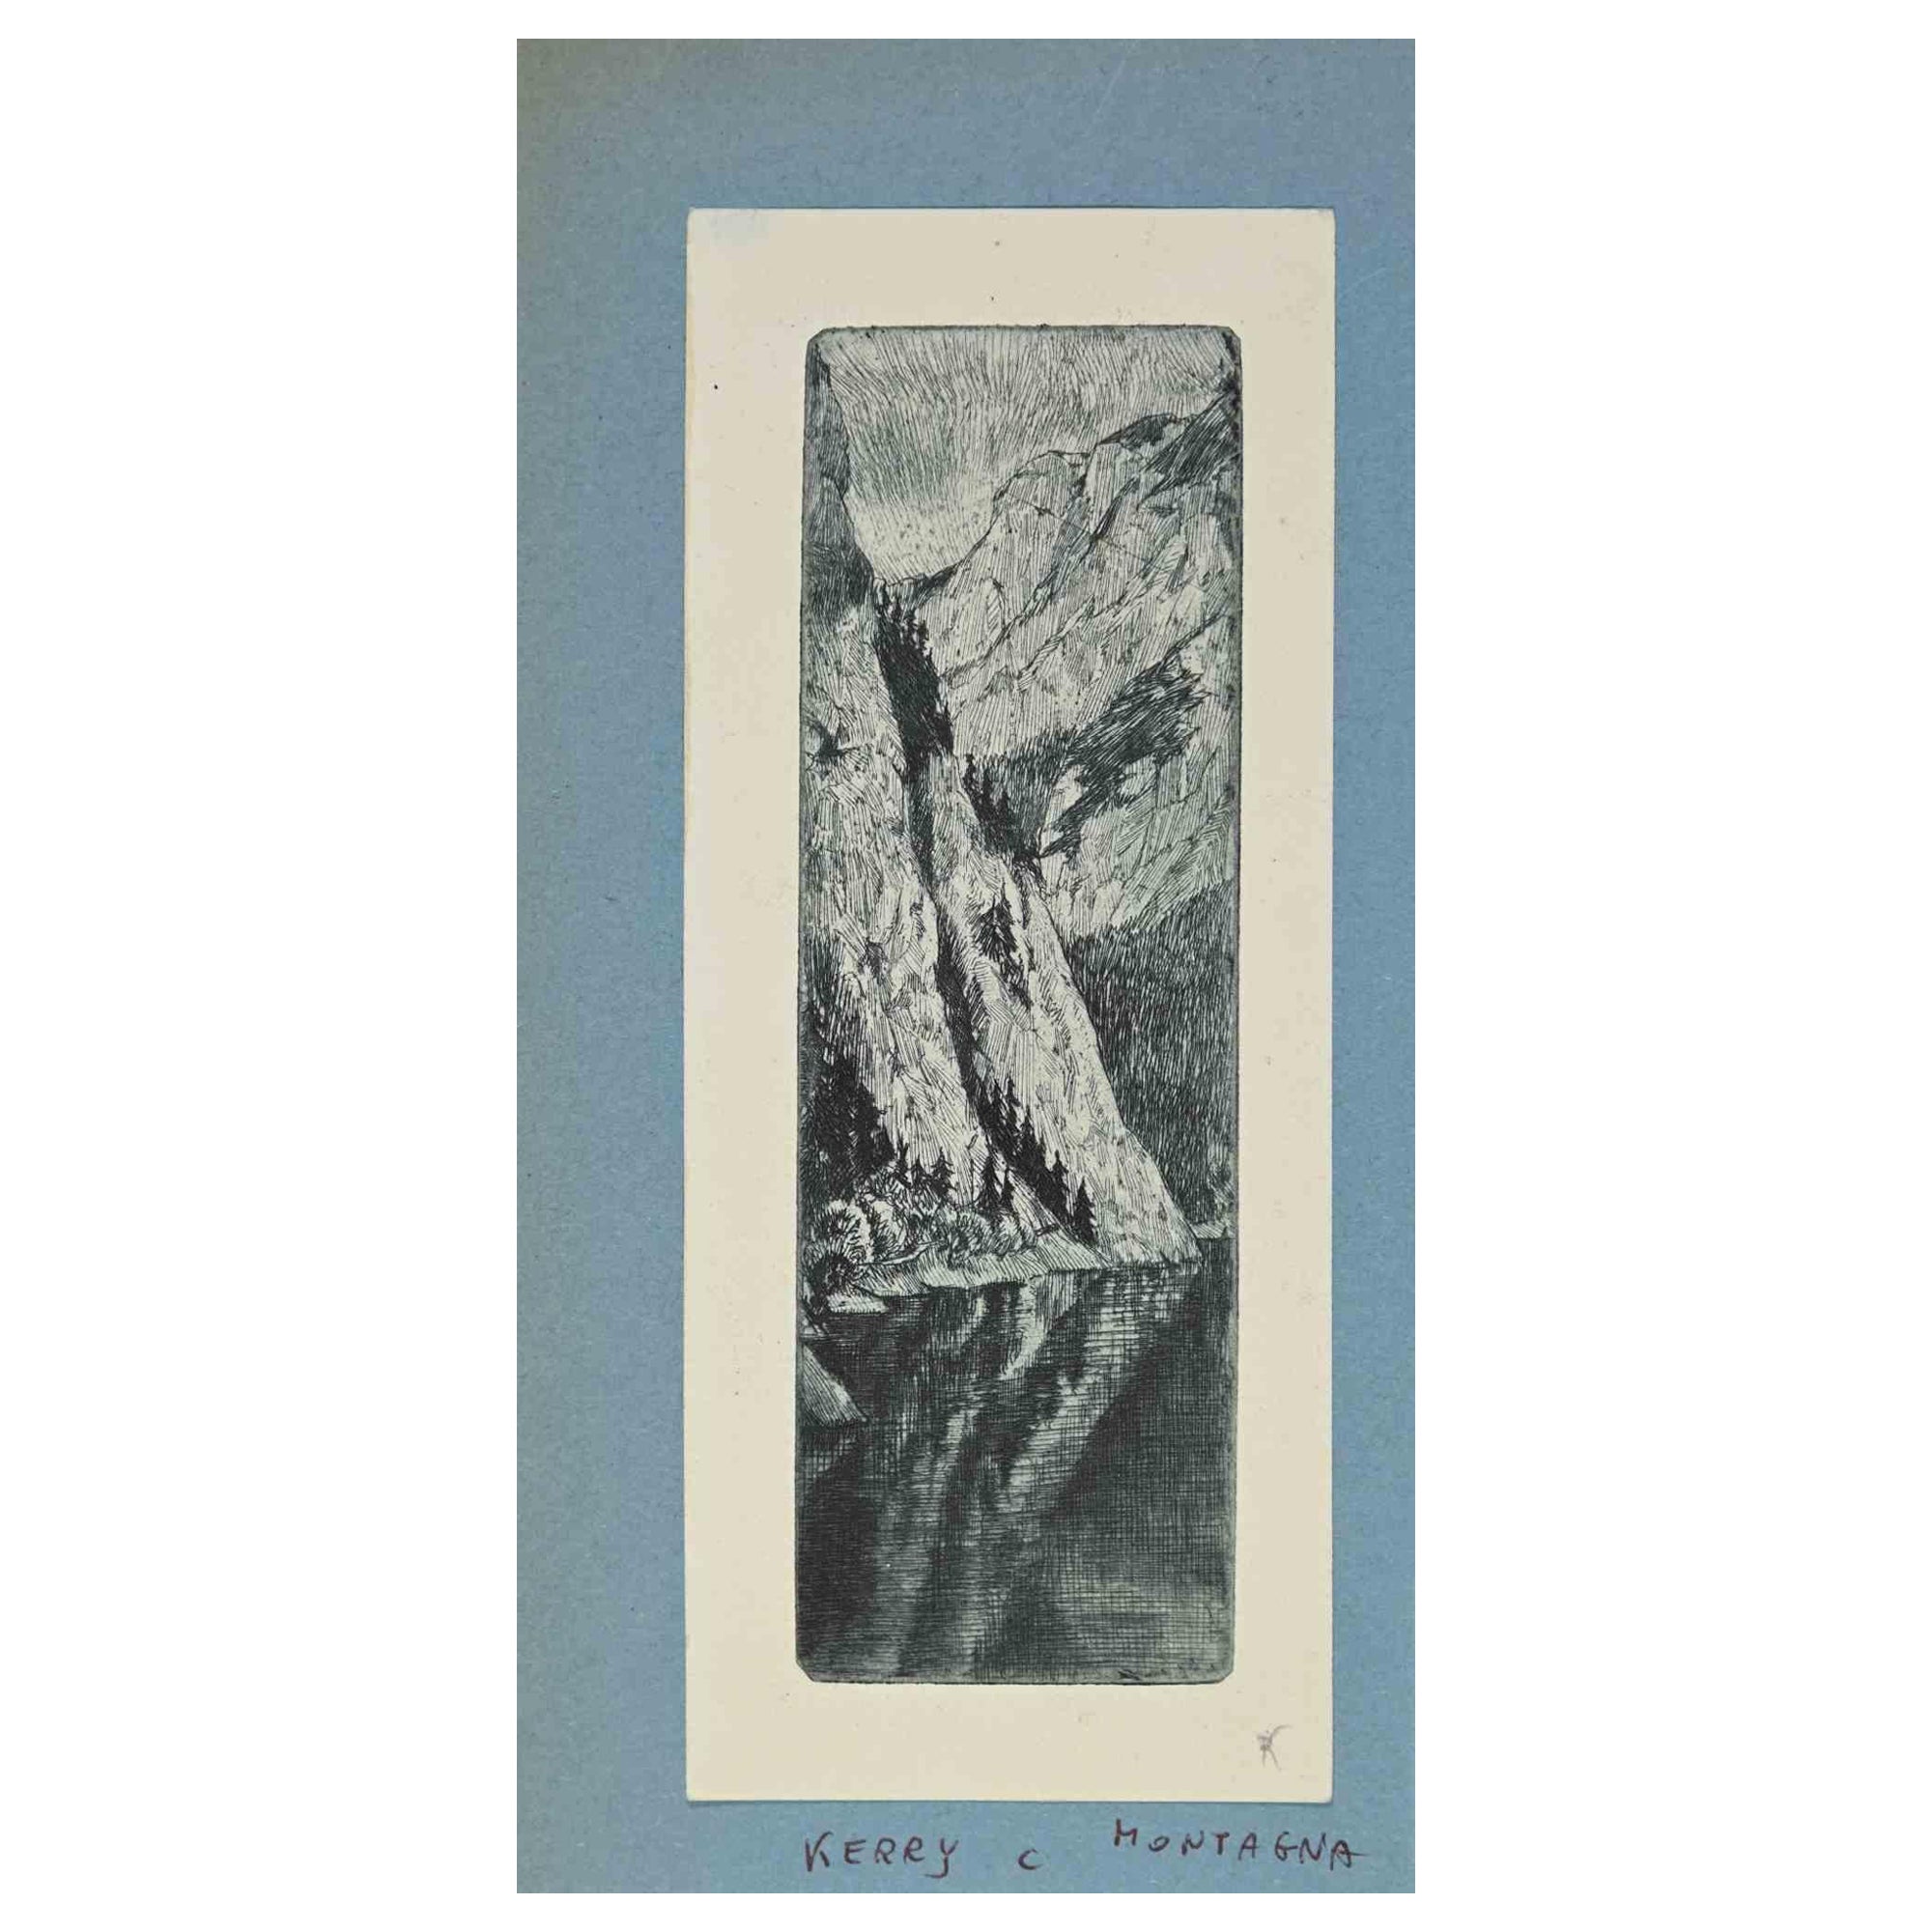 Ex Libris - Mountains is an Artwork realized in 1940s, by the Austrian Artist Christine Kerry (1889-1978)

Etching print on ivory paper. Hand Signed on back.

The work is glued on colored cardboard.

Total dimensions: 22x11 cm.

Good